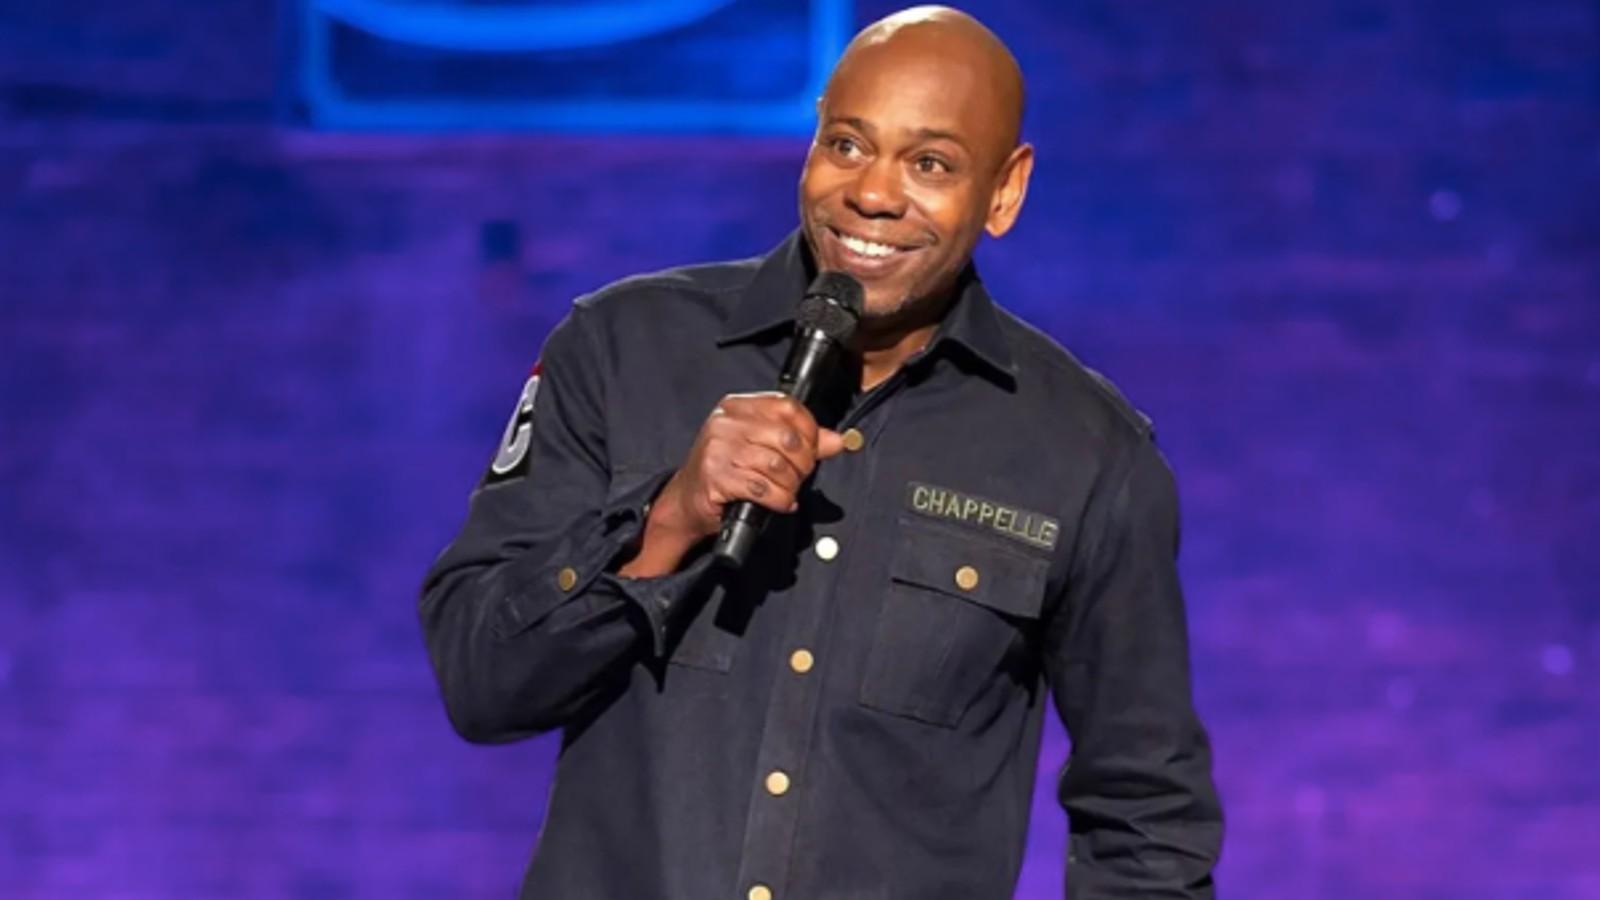 Dave Chapelle Netflix special